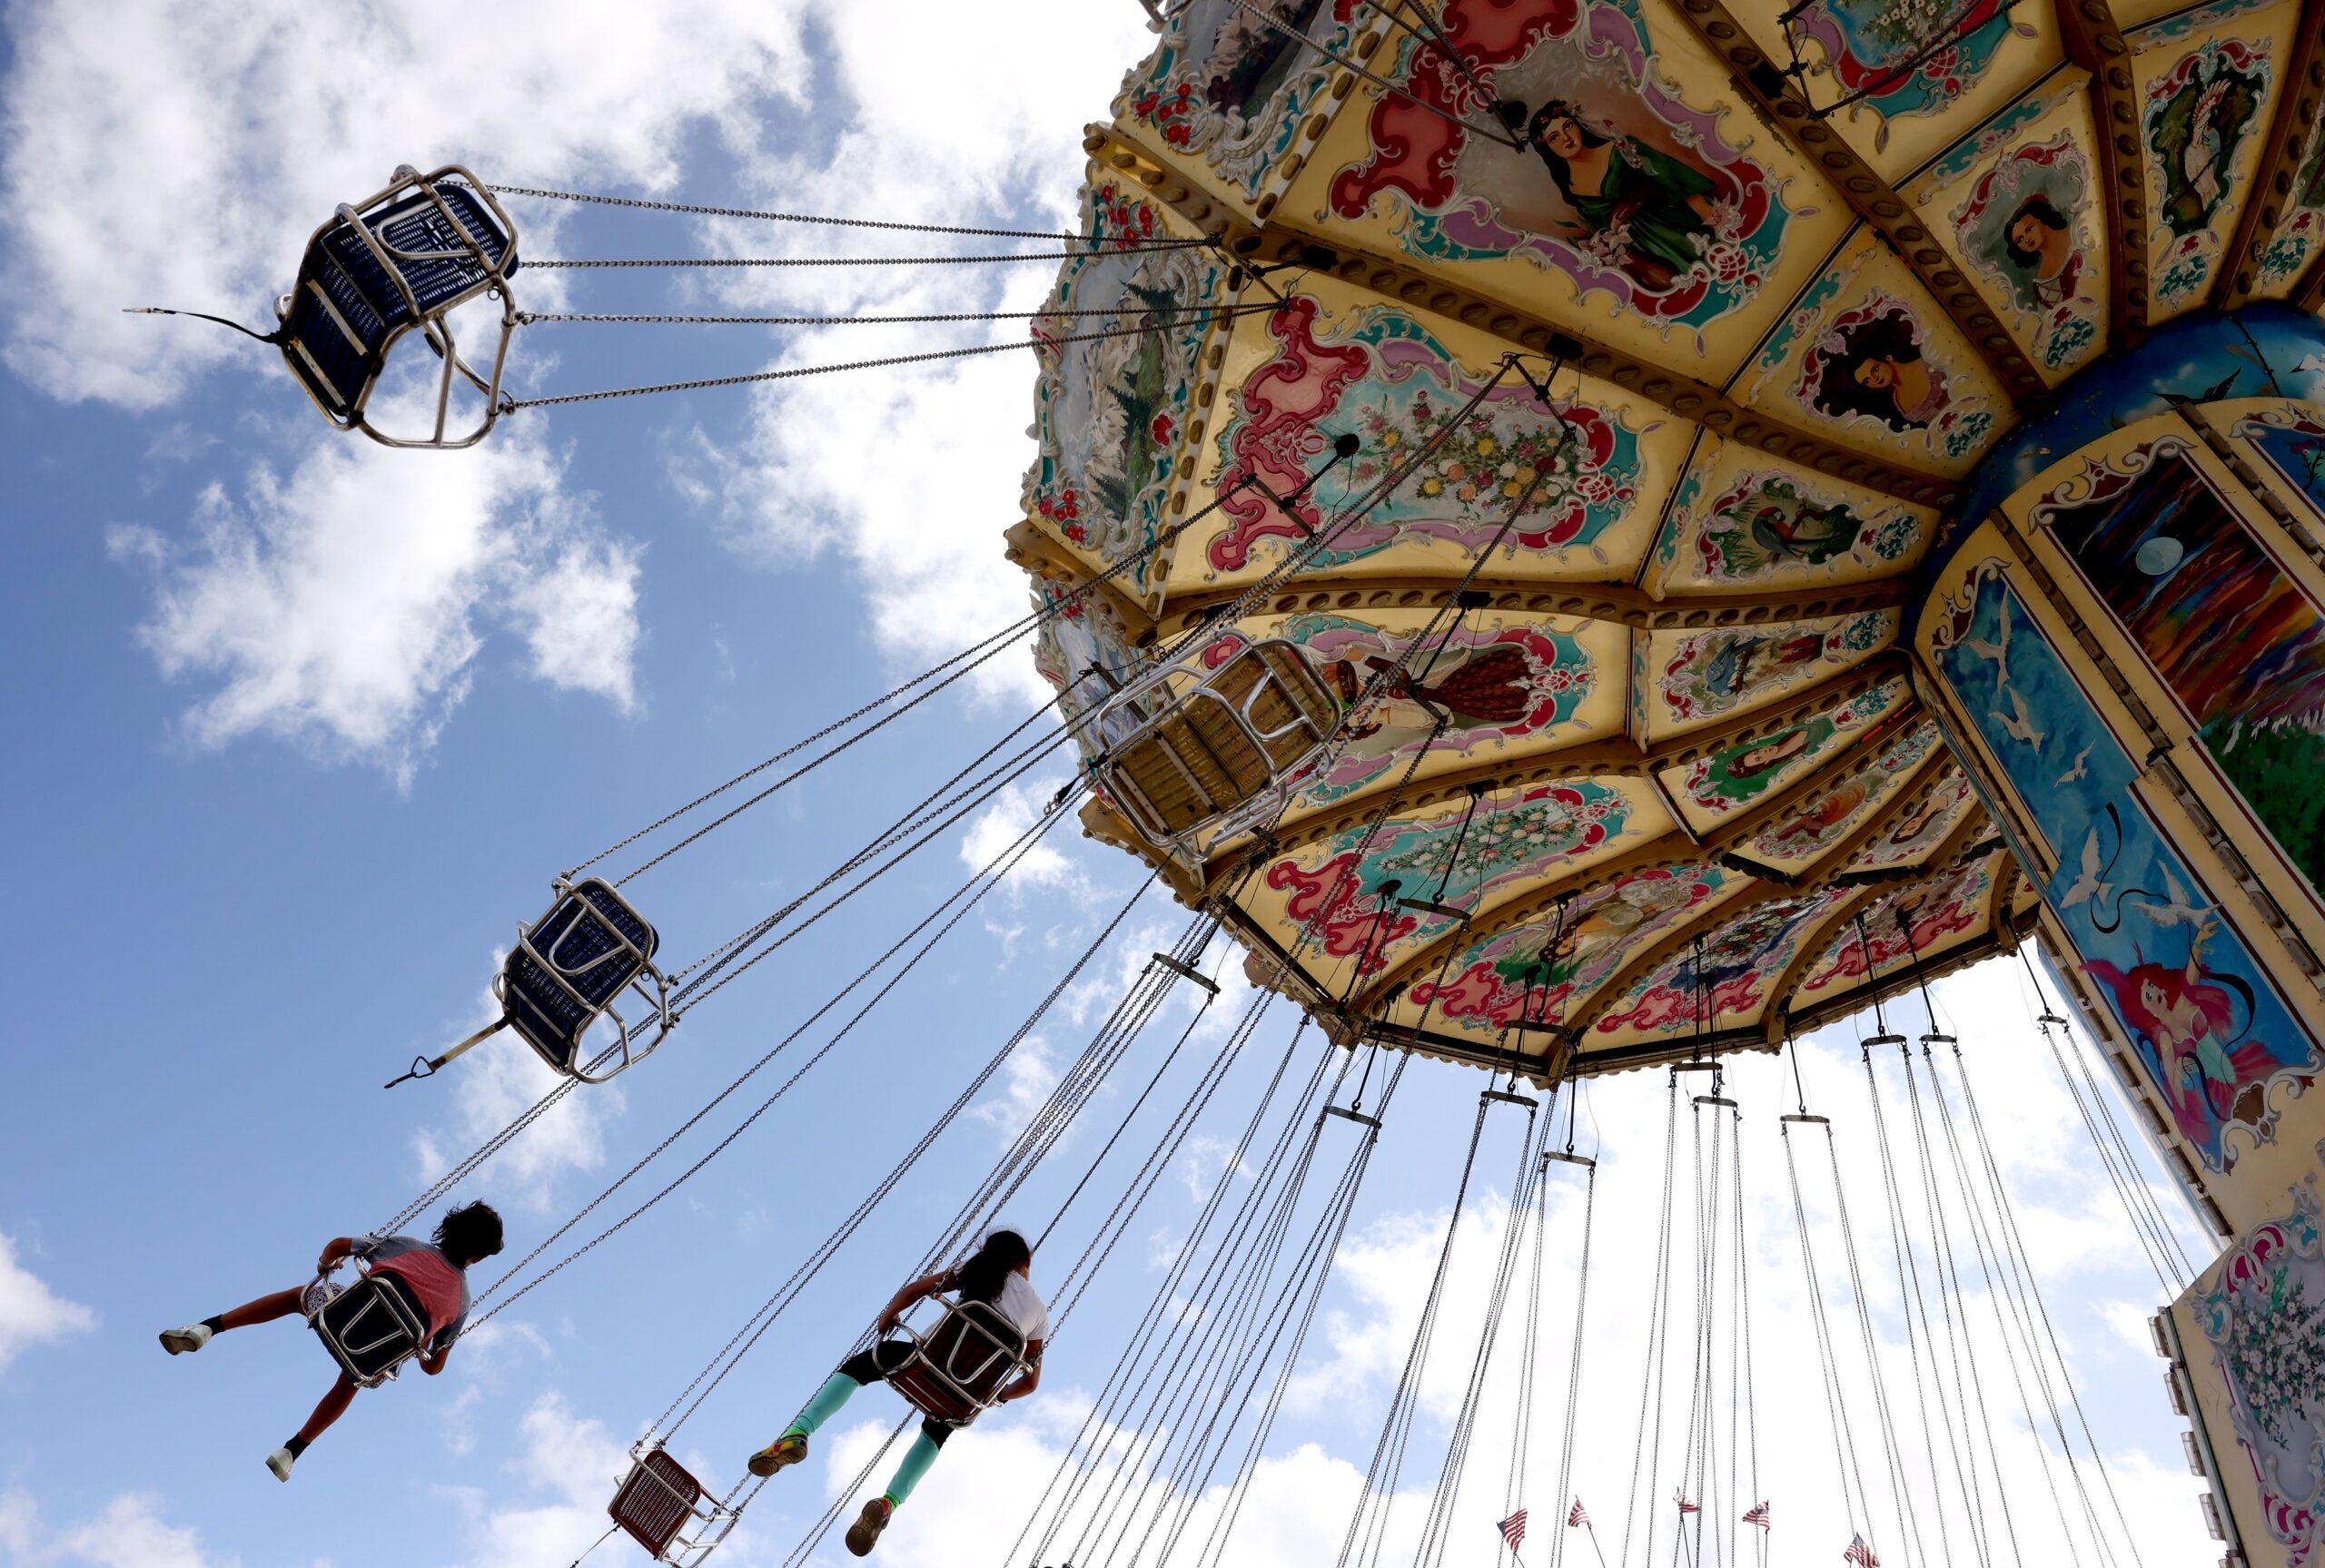 People took flight on an amusement ride at the Big E.